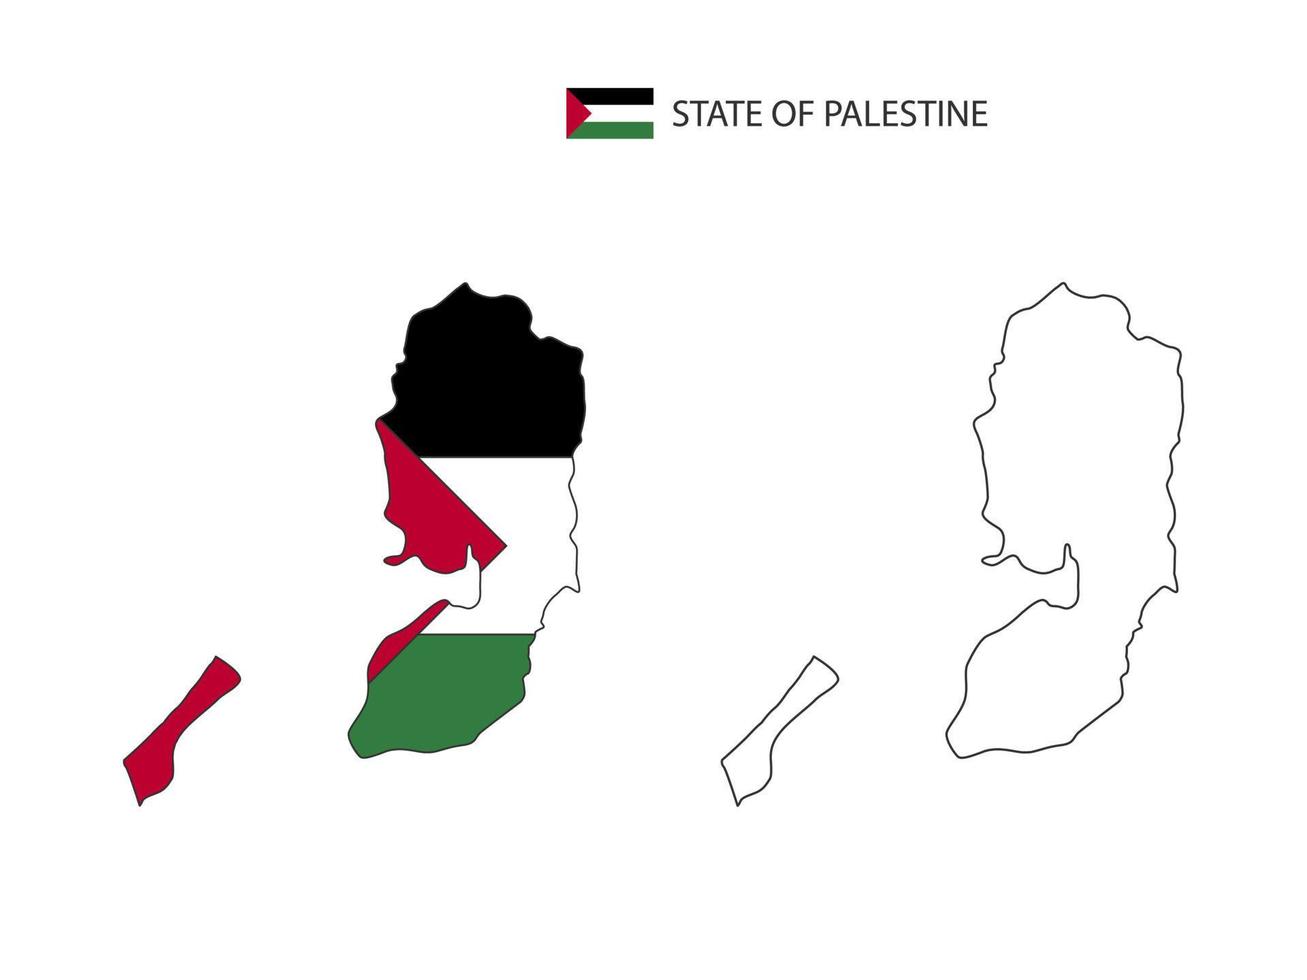 State of Palestine map city vector divided by outline simplicity style. Have 2 versions, black thin line version and color of country flag version. Both map were on the white background.